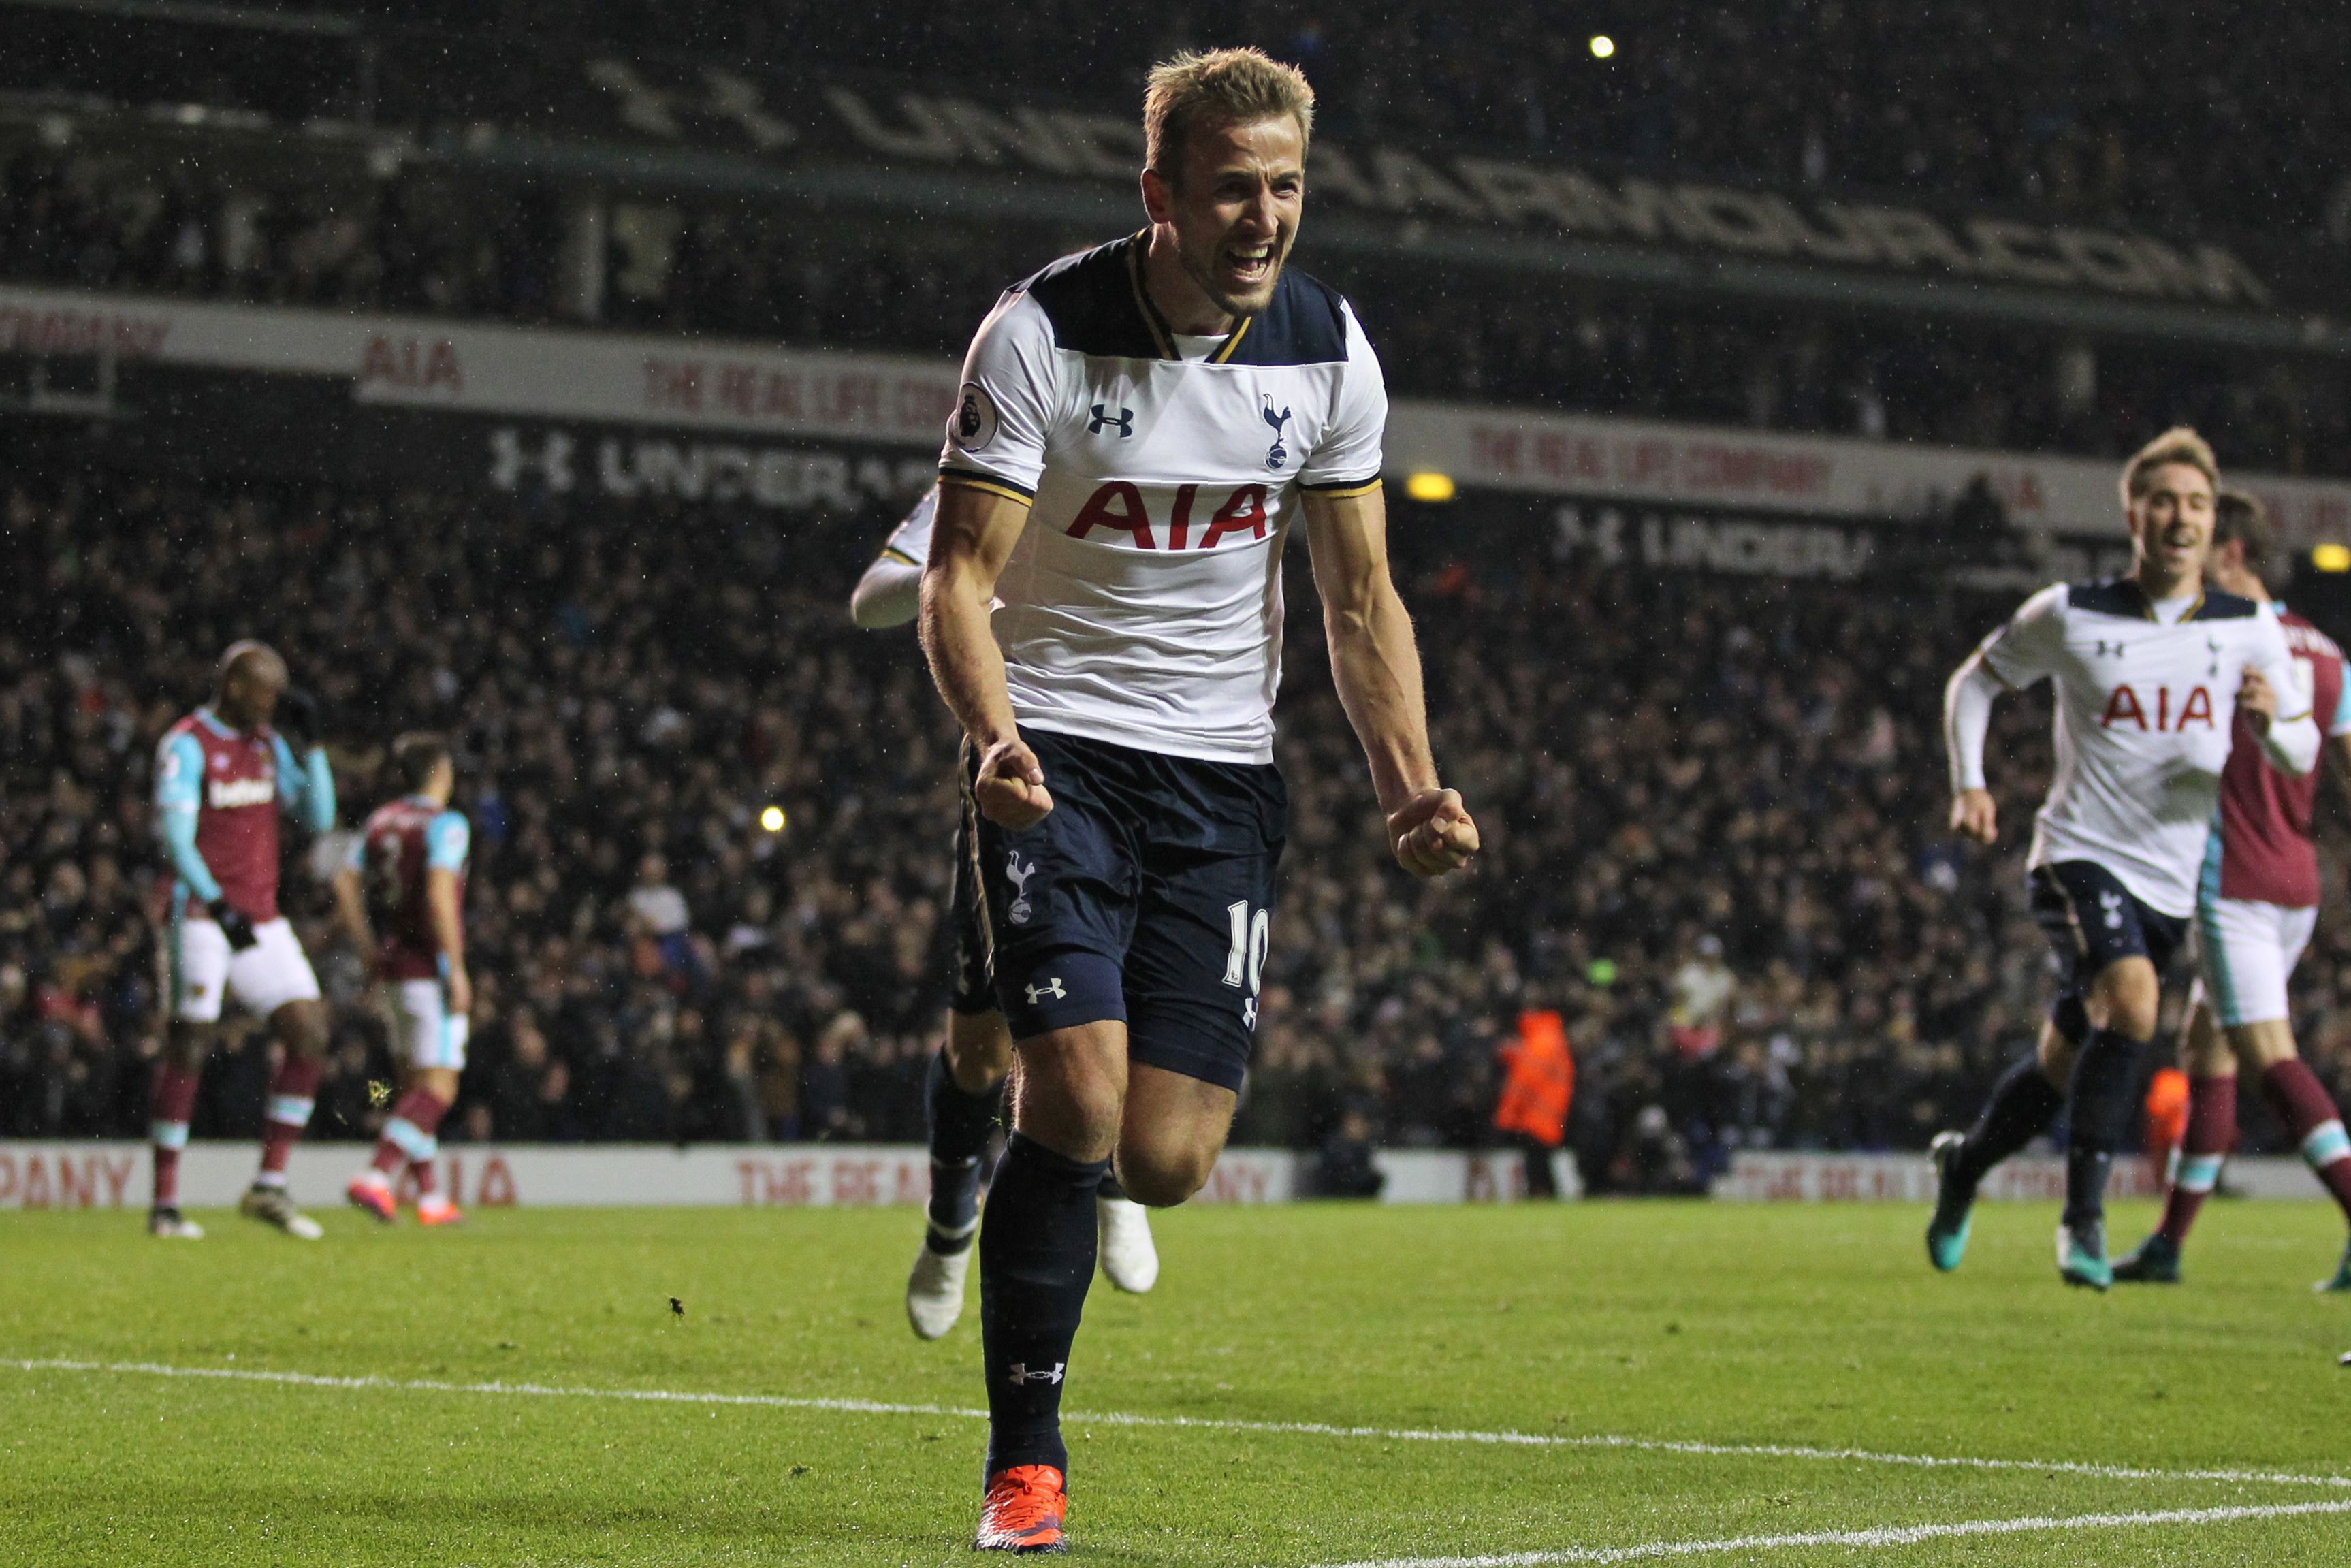 Tottenham Hotspur's English striker Harry Kane celebrates after scoring their third goal from the penalty spot during the English Premier League football match between Tottenham Hotspur and West Ham United at White Hart Lane in London, on November 19, 2016.
Tottenham won the game 3-2. / AFP / Ian KINGTON / RESTRICTED TO EDITORIAL USE. No use with unauthorized audio, video, data, fixture lists, club/league logos or 'live' services. Online in-match use limited to 75 images, no video emulation. No use in betting, games or single club/league/player publications.  /         (Photo credit should read IAN KINGTON/AFP/Getty Images)